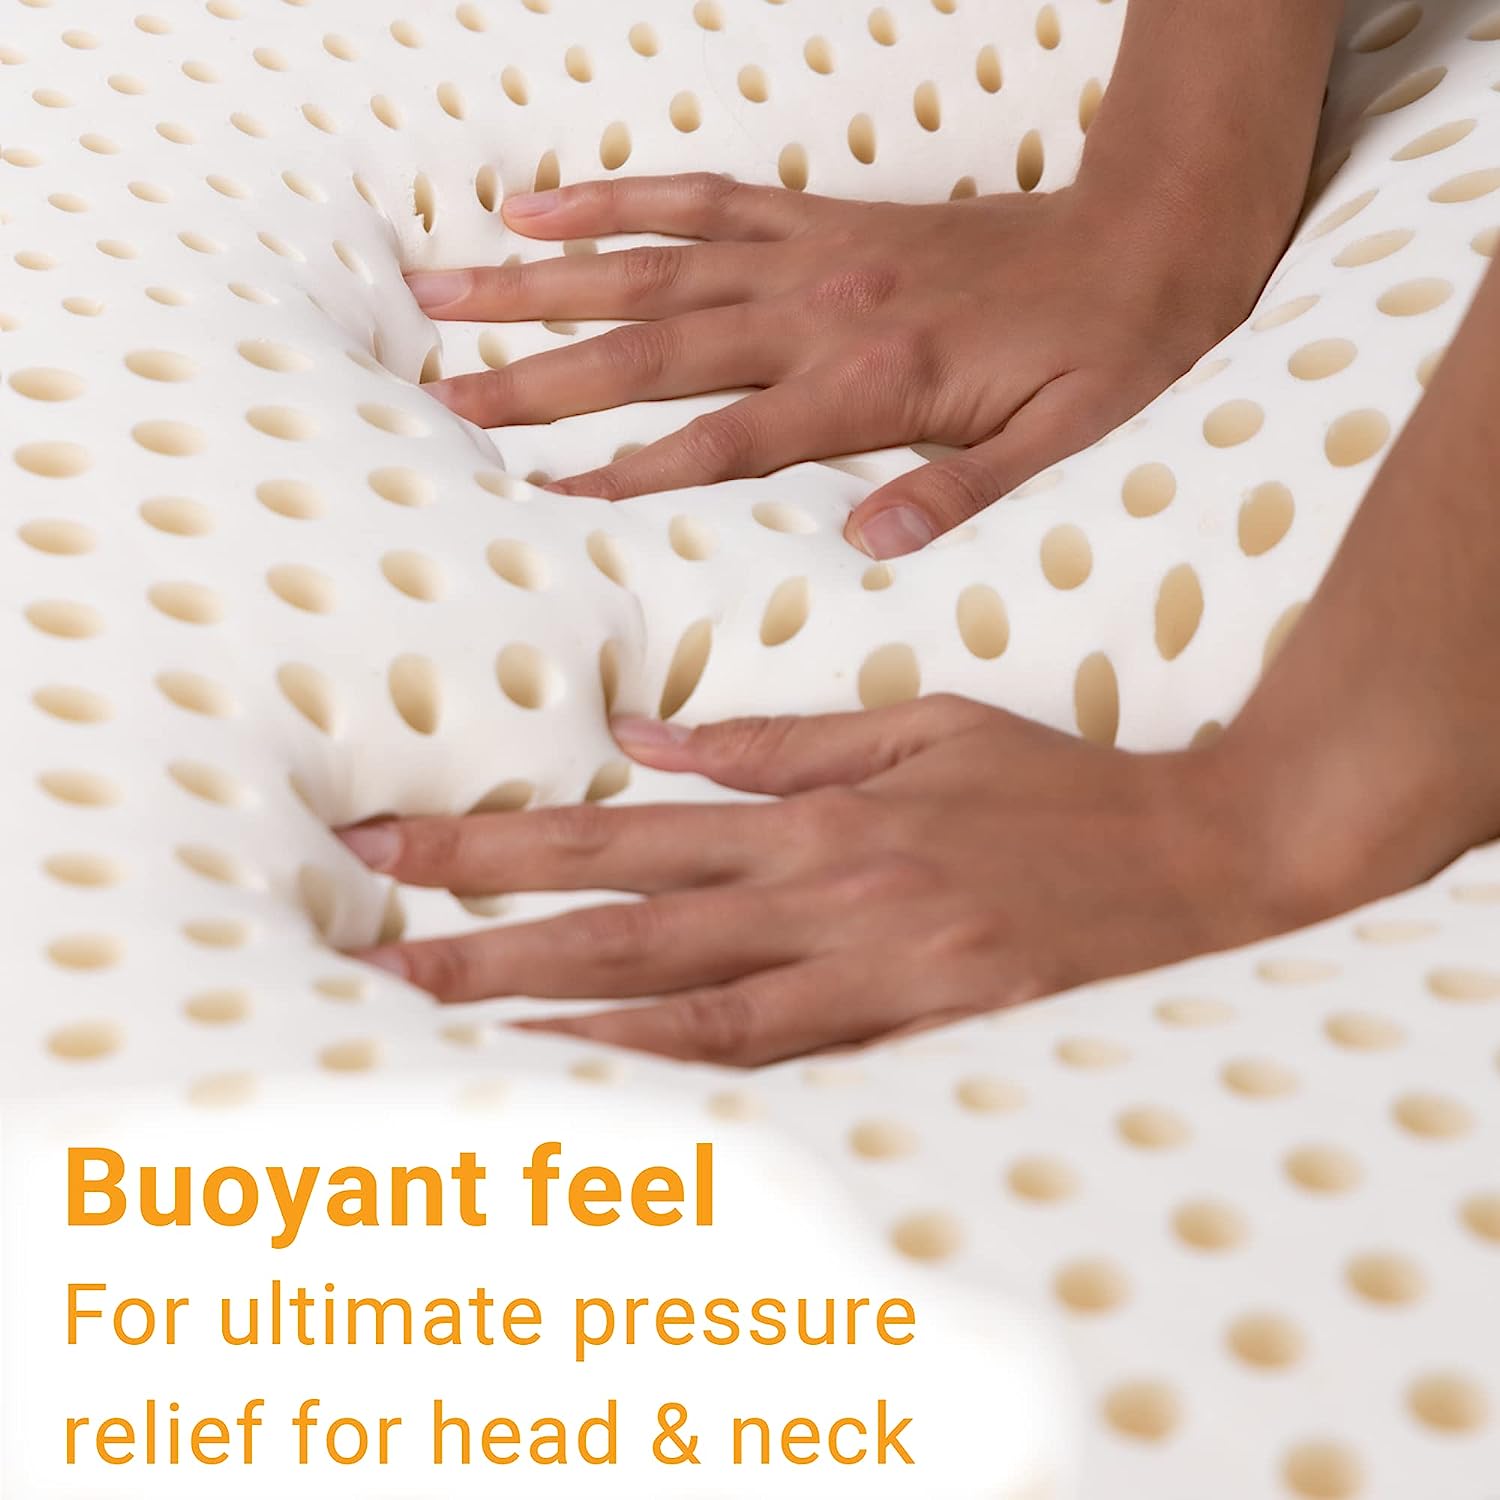 Buoyant Feel, Hands squishing the Juvea pillow